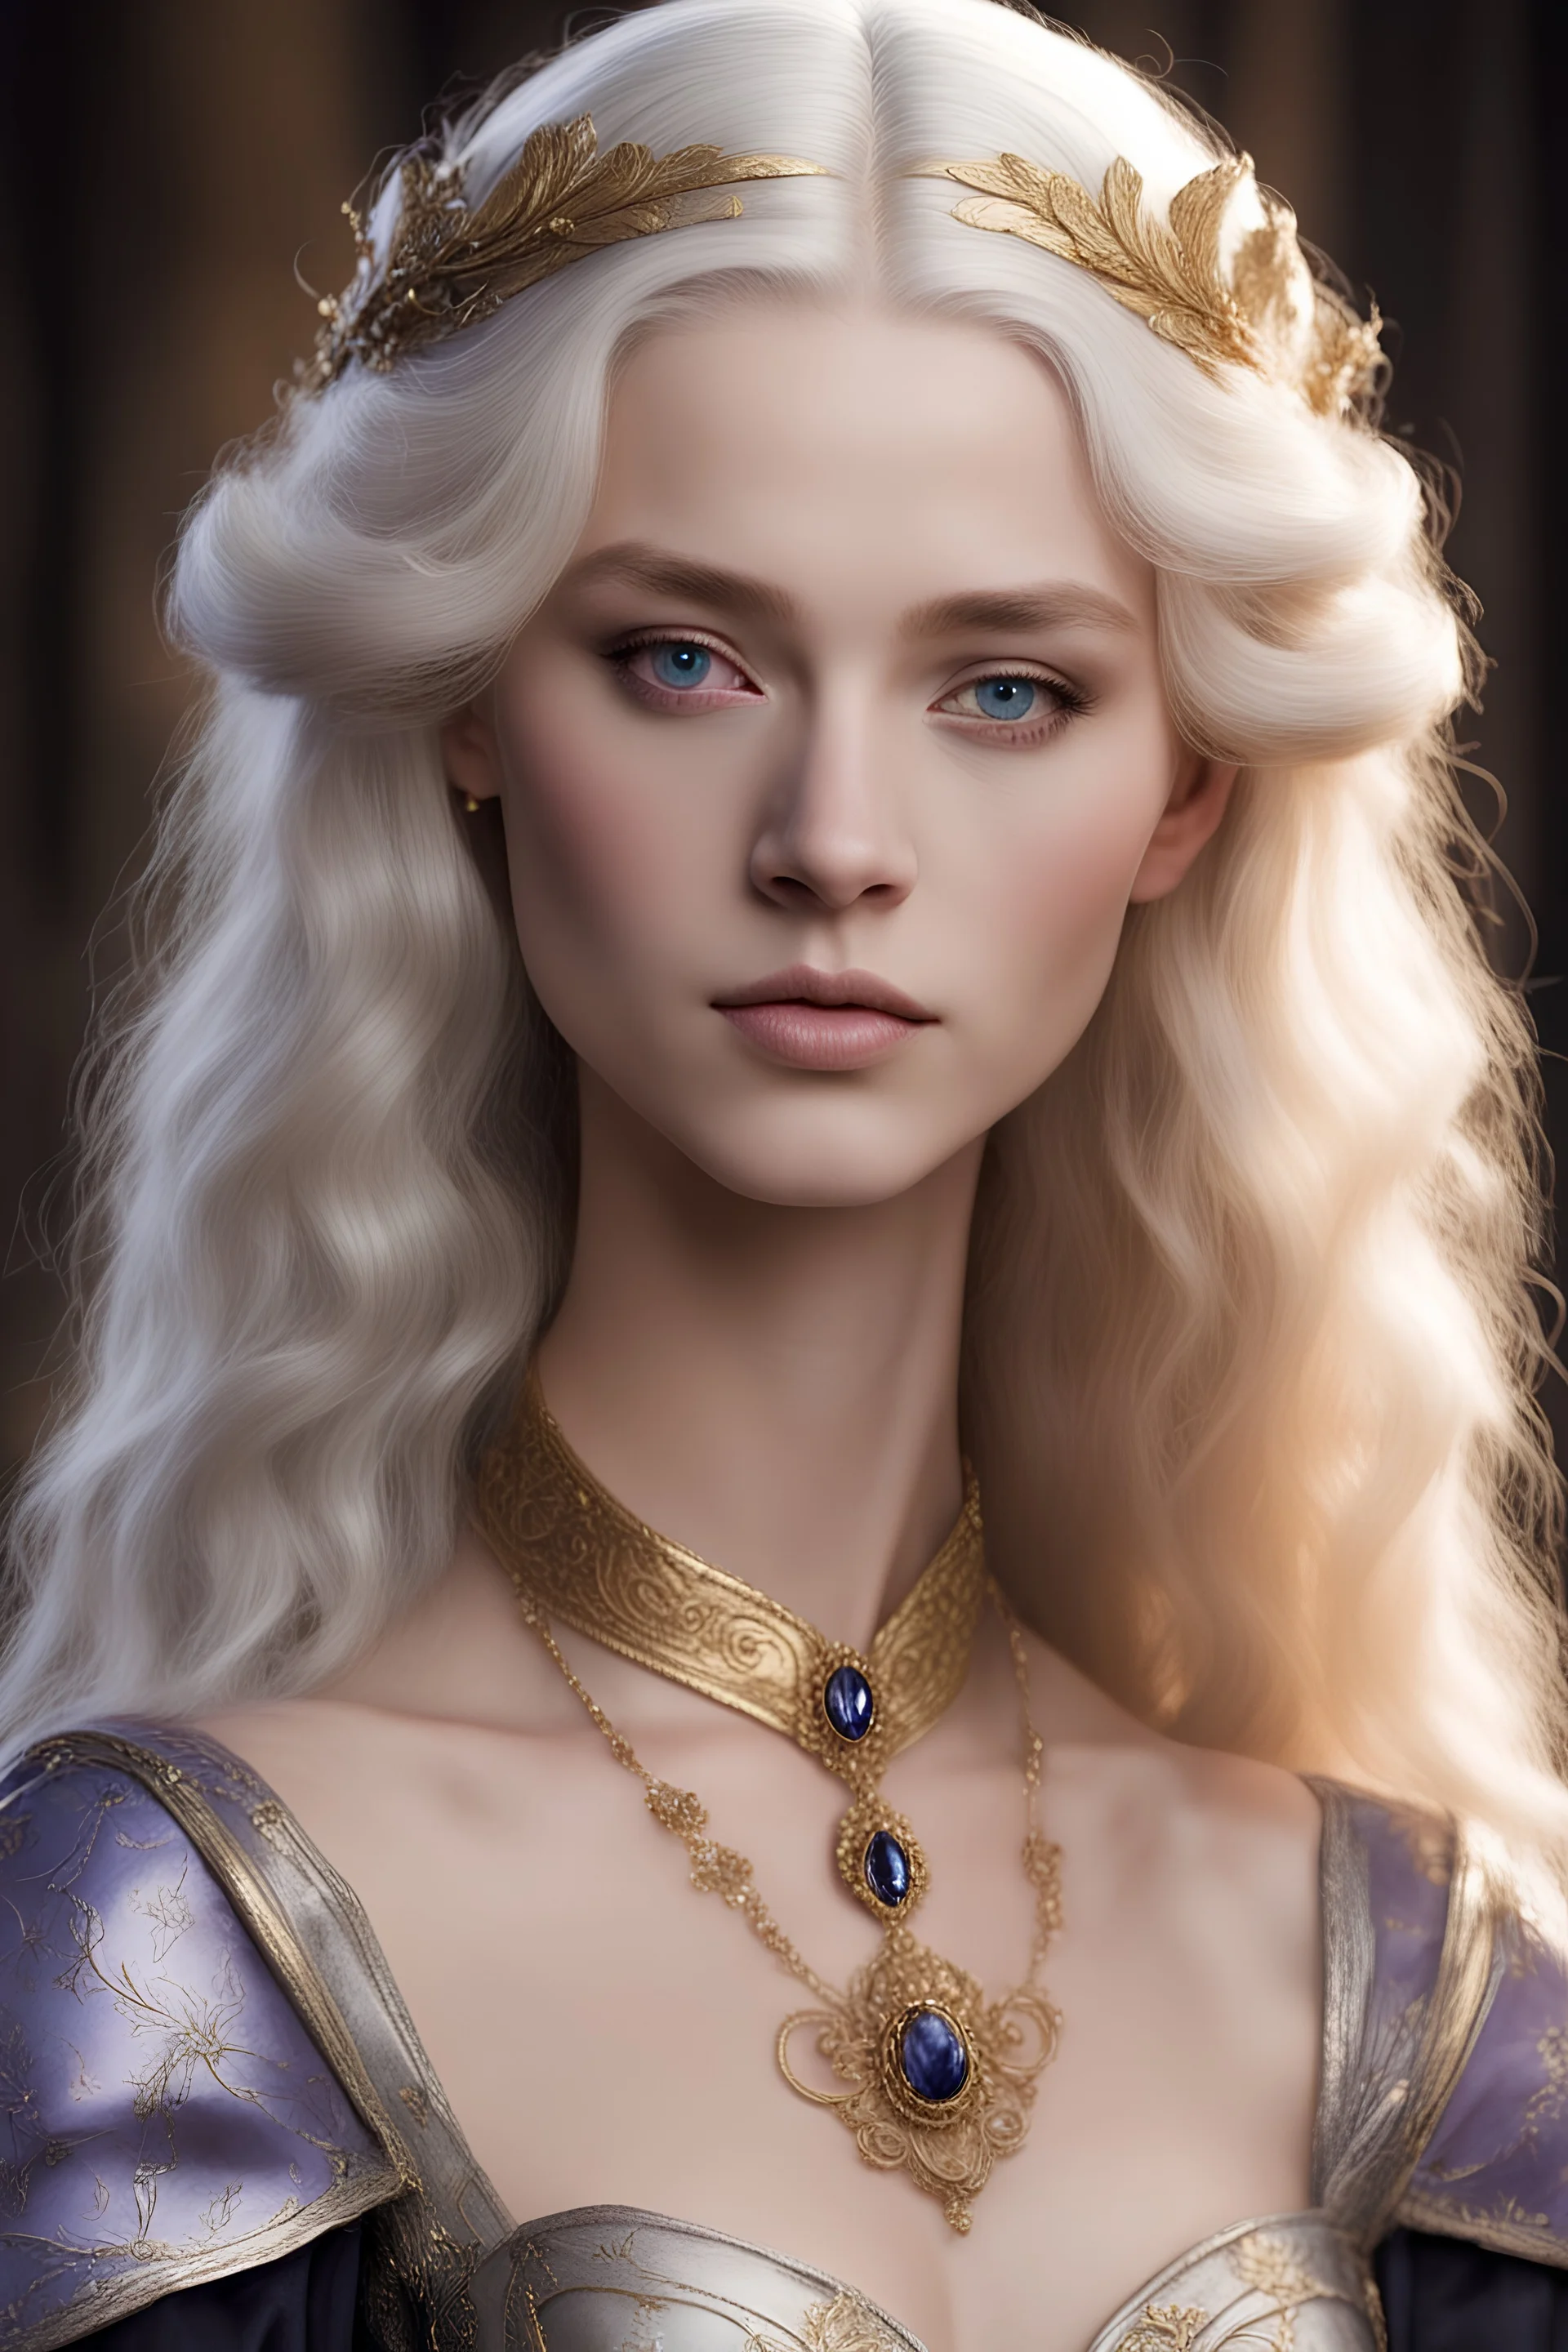 Maegelle Targaryen, aged 16, epitomizes Targaryen allure with her golden hair and sapphire lilac eyes. Despite her royal lineage, her demeanor exudes youthful innocence and curiosity. She boasts a slender frame adorned with delicate features, framed by cascading golden hair. her porcelain skin and high soft cheekbones. Her hair is worn in a braid and not loose